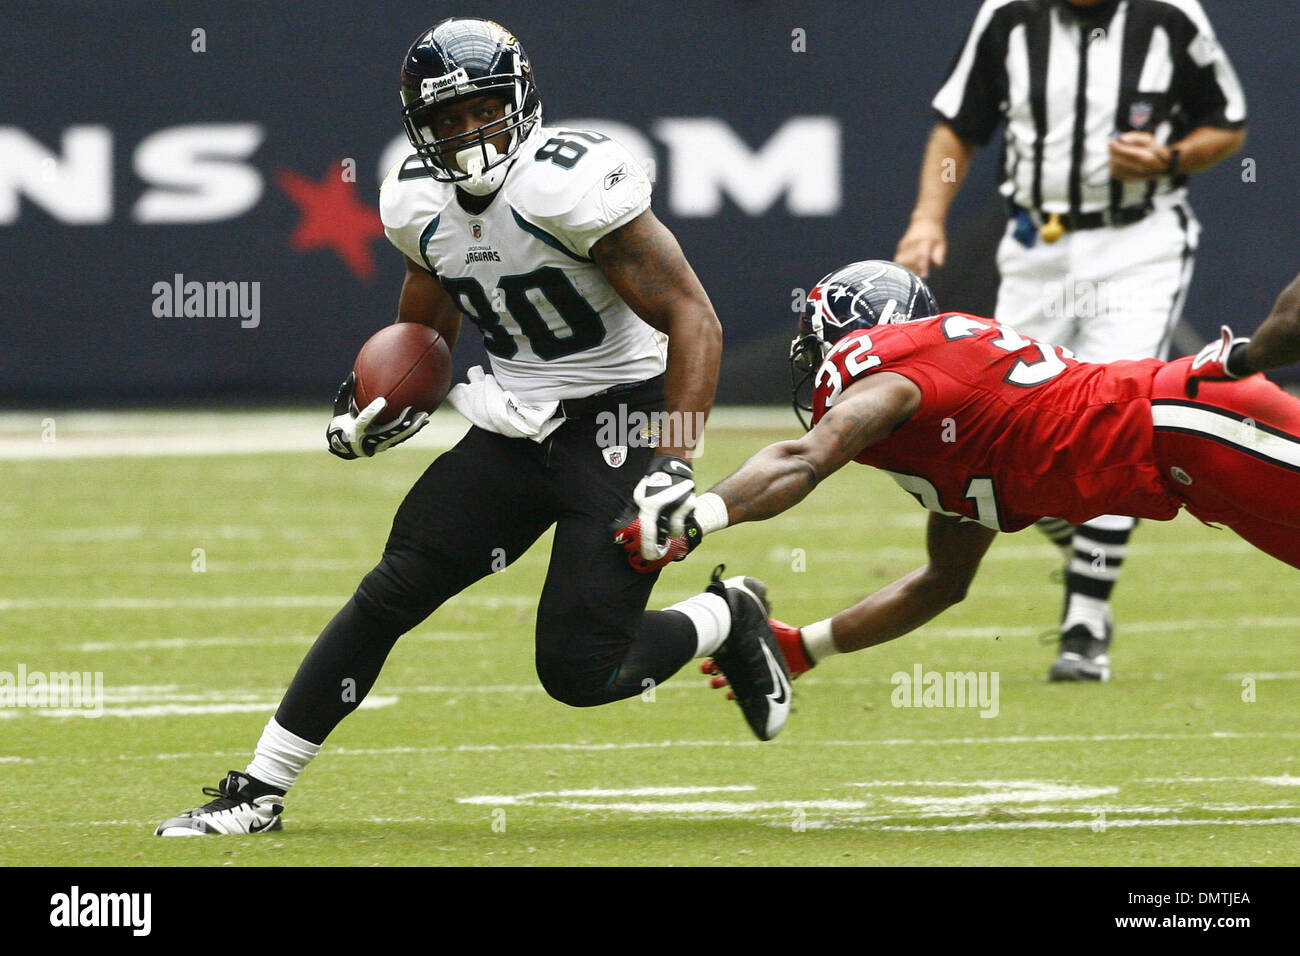 Mike Thomas (#80) of the Jacksonville Jaguars evades a diving tackle by Fred  Bennett (#32) of the Houston Texans. The Jaguars defeated the Texans 31-24  at Reliant Stadium in Houston TX. (Credit